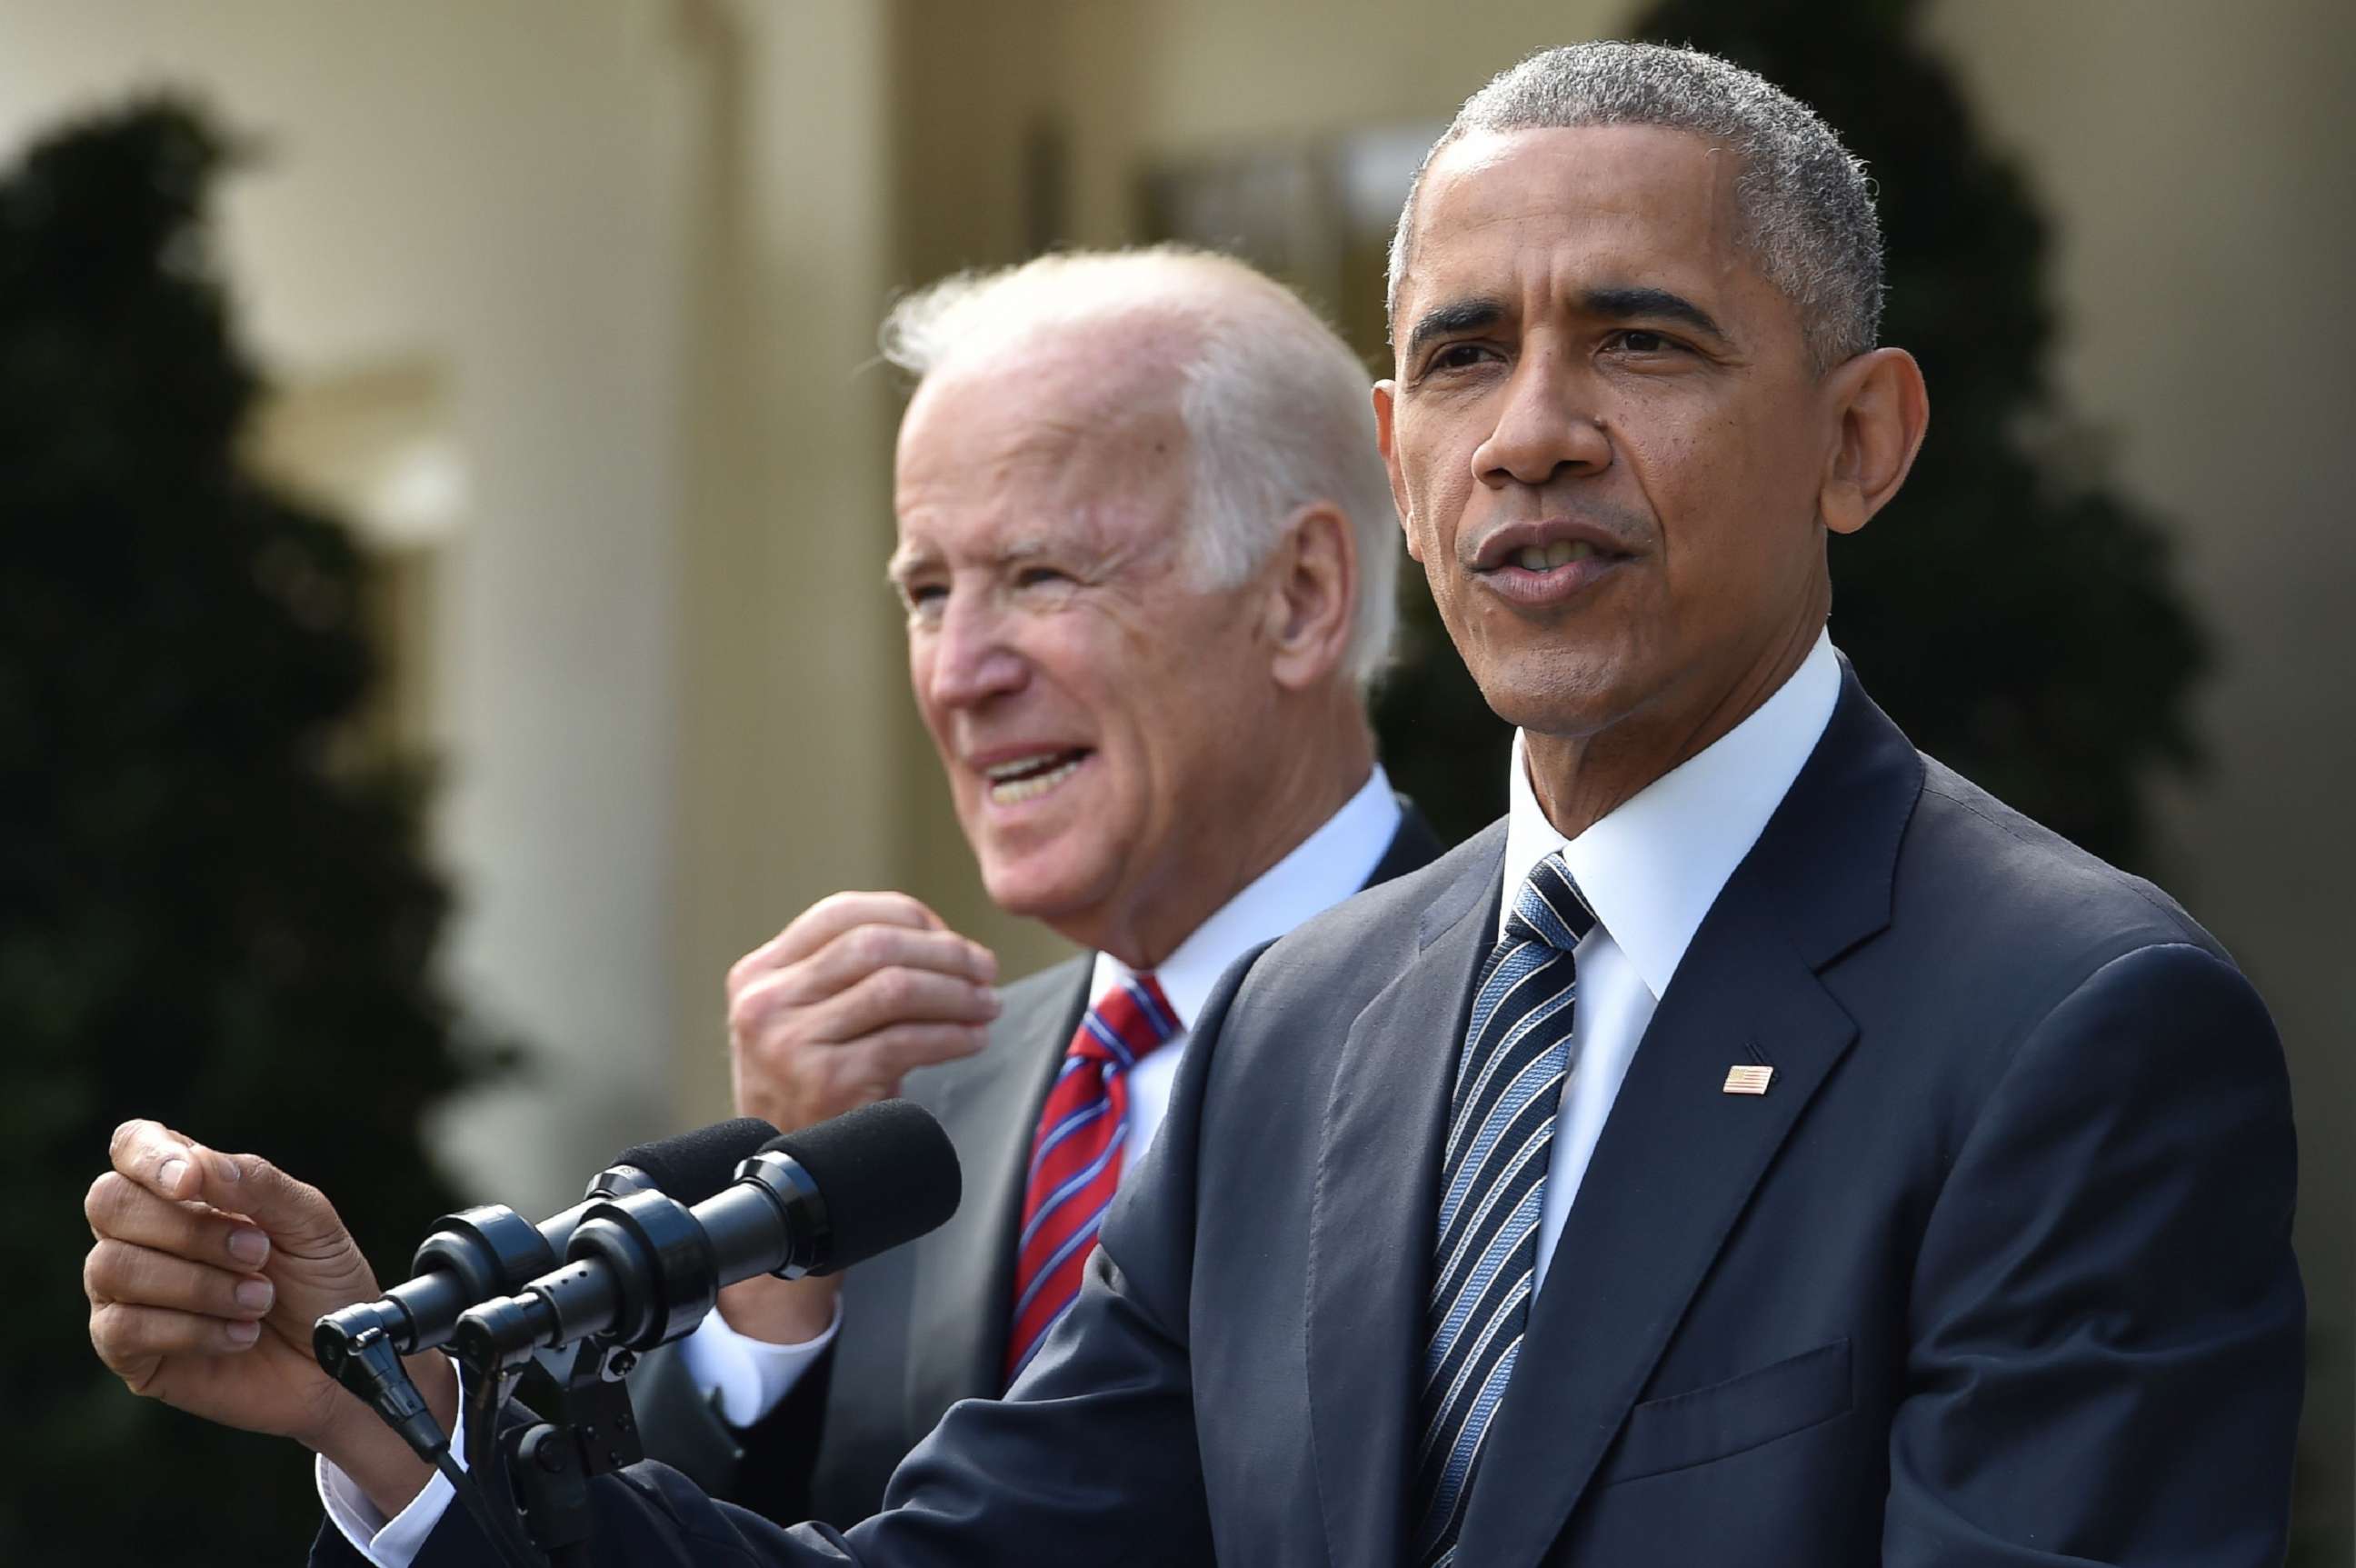 PHOTO: In this file photo taken on Nov. 9, 2016, President Barack Obama together with Vice President Joe Biden addresses the nation publicly for the first time since the election of Donald Trump as his successor, at the White House in Washington, D.C.